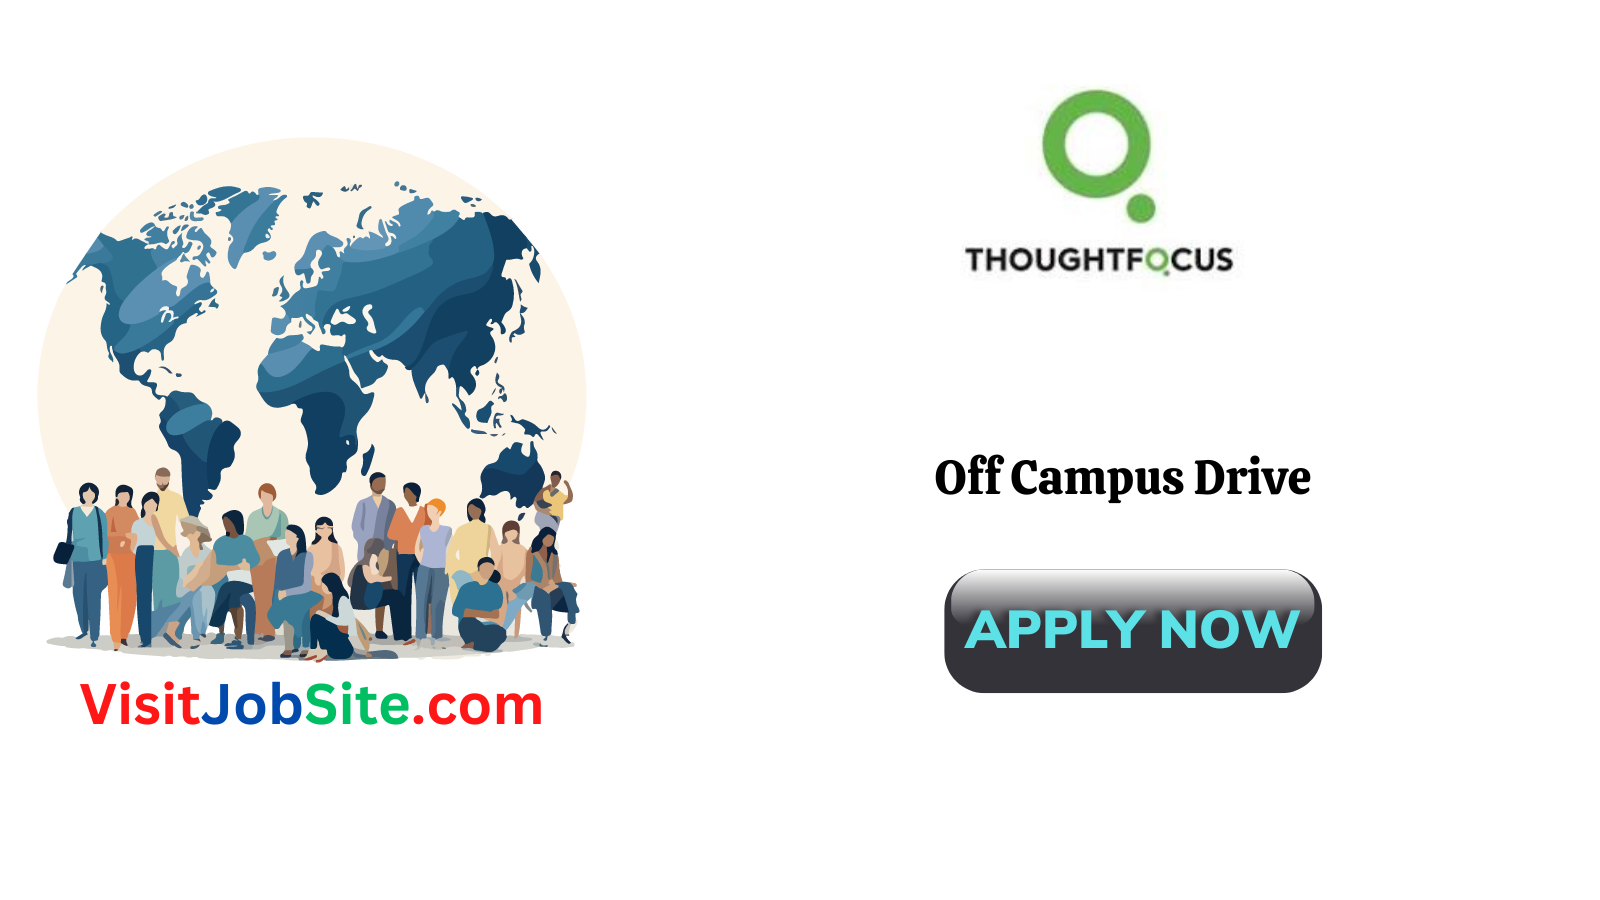 Thoughtfocus Off Campus Drive